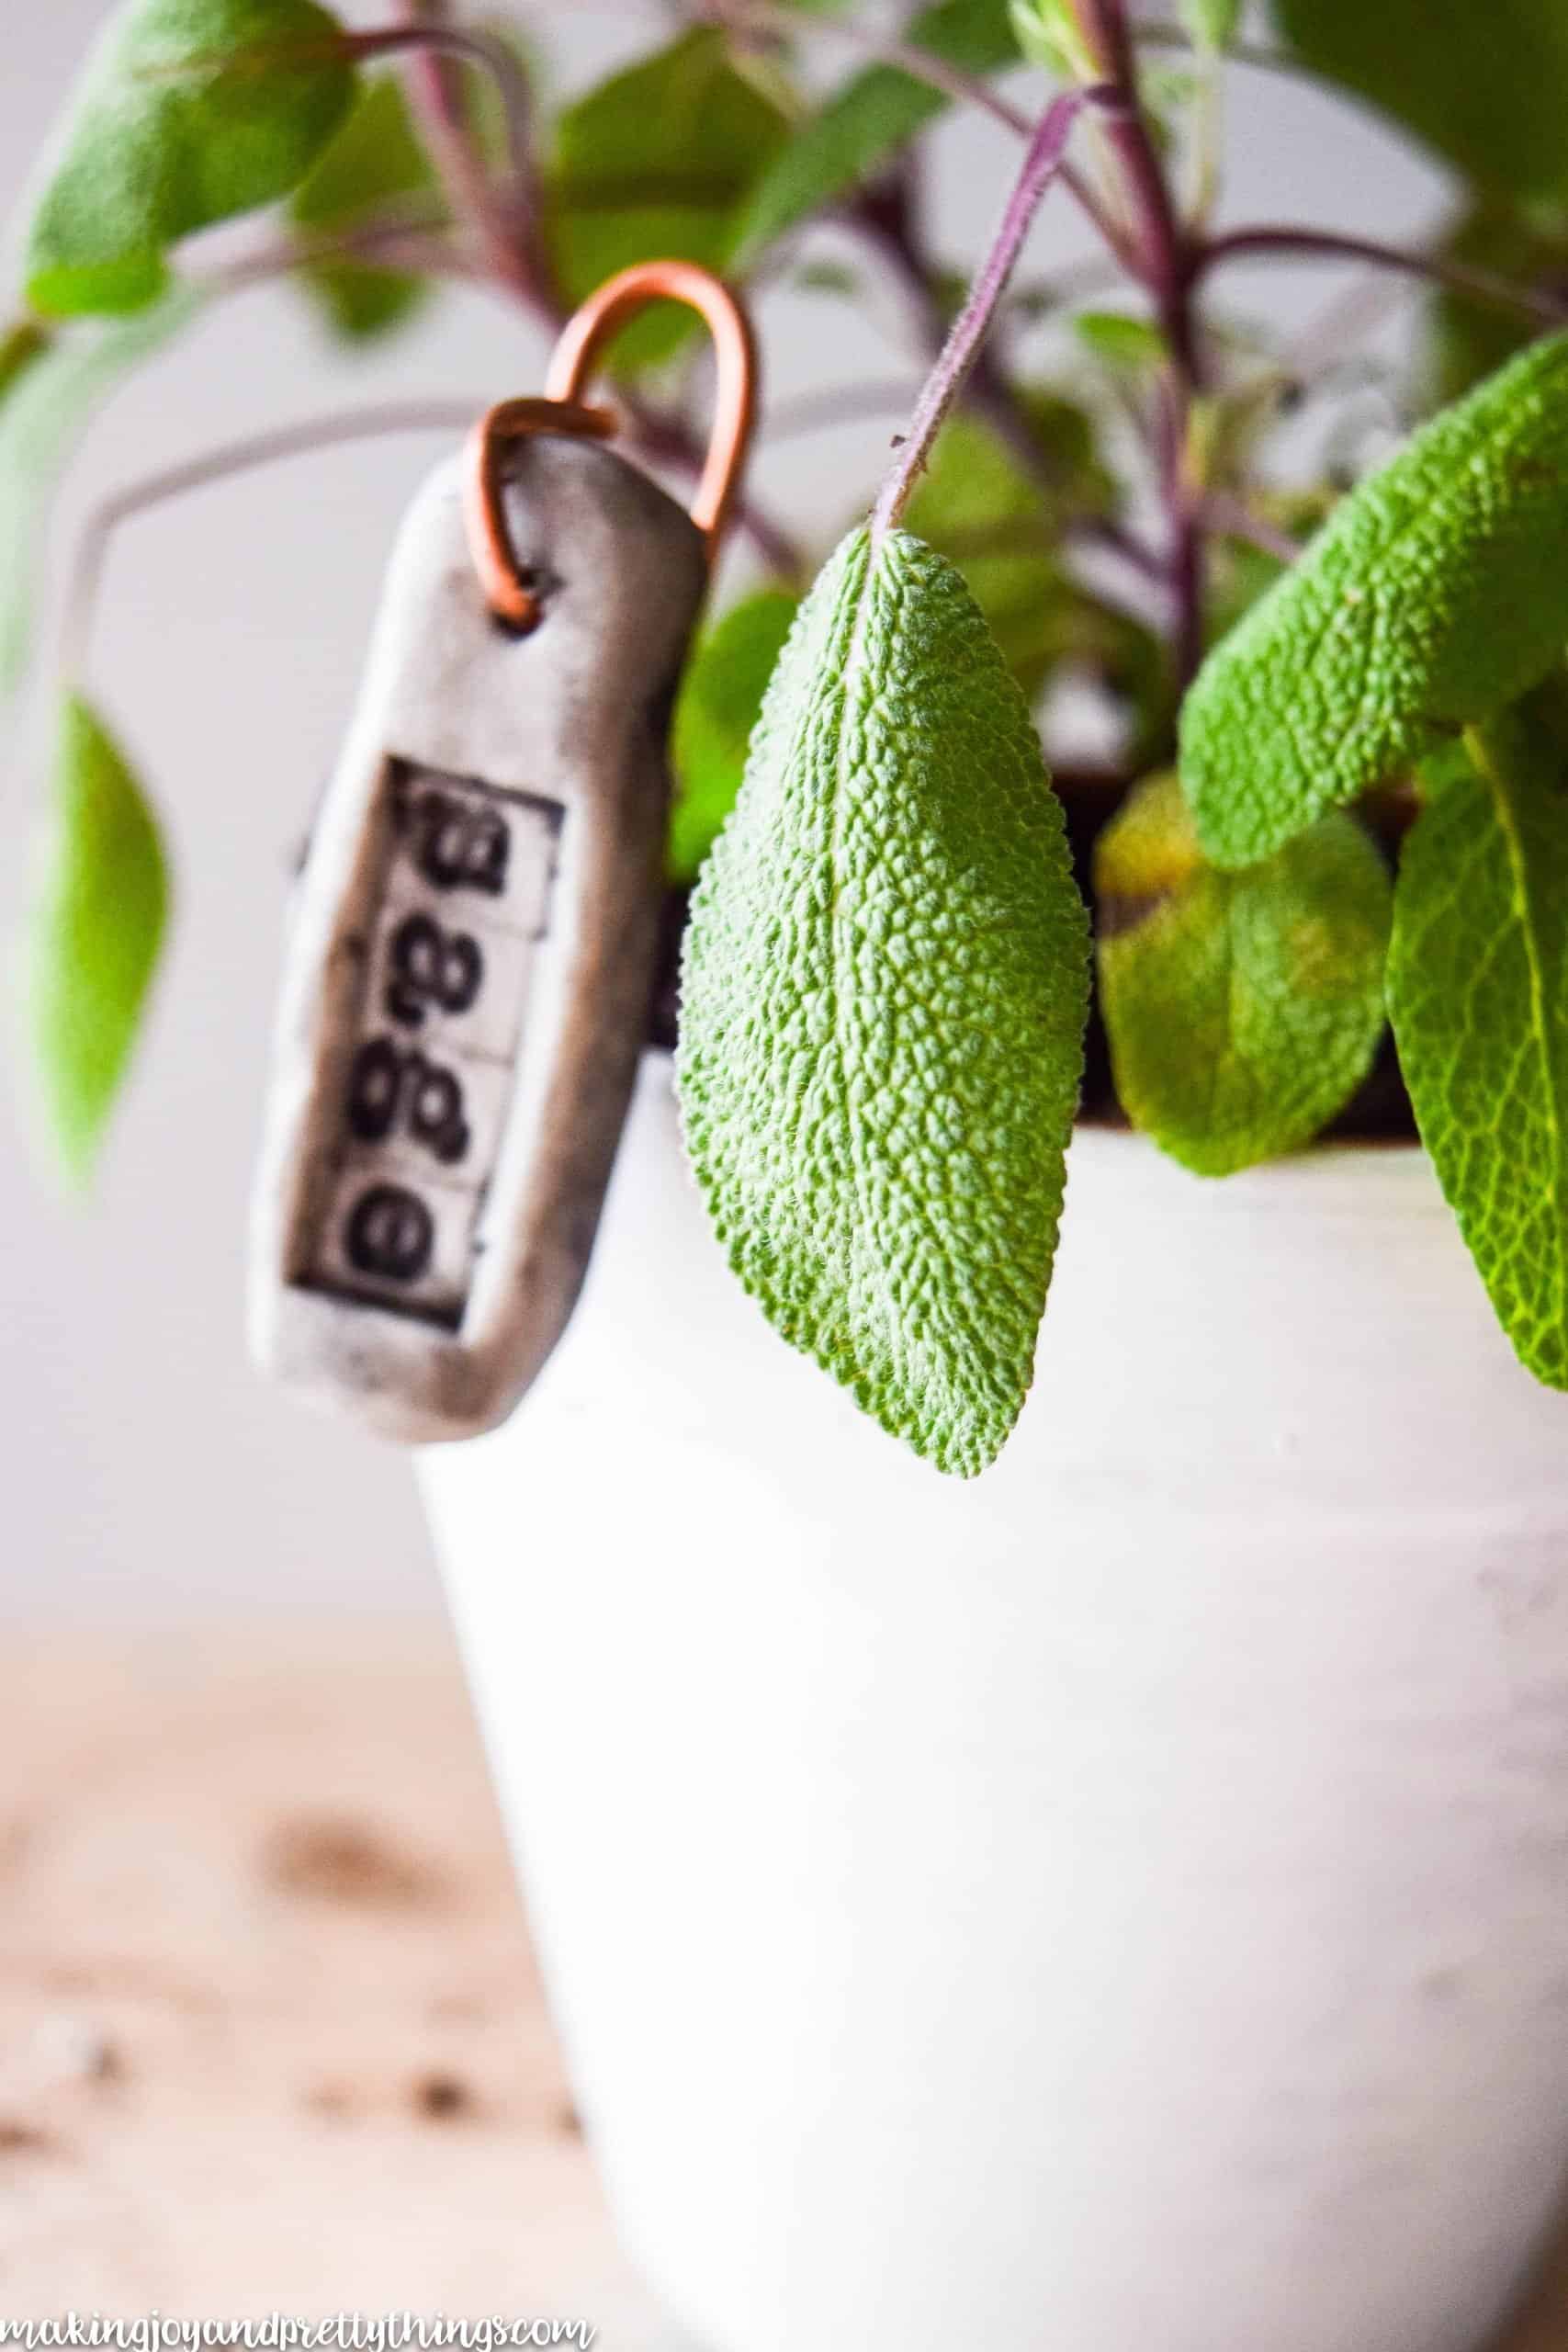 The options for these DIY plant labels are as endless as the plants you can put into pots and your garden